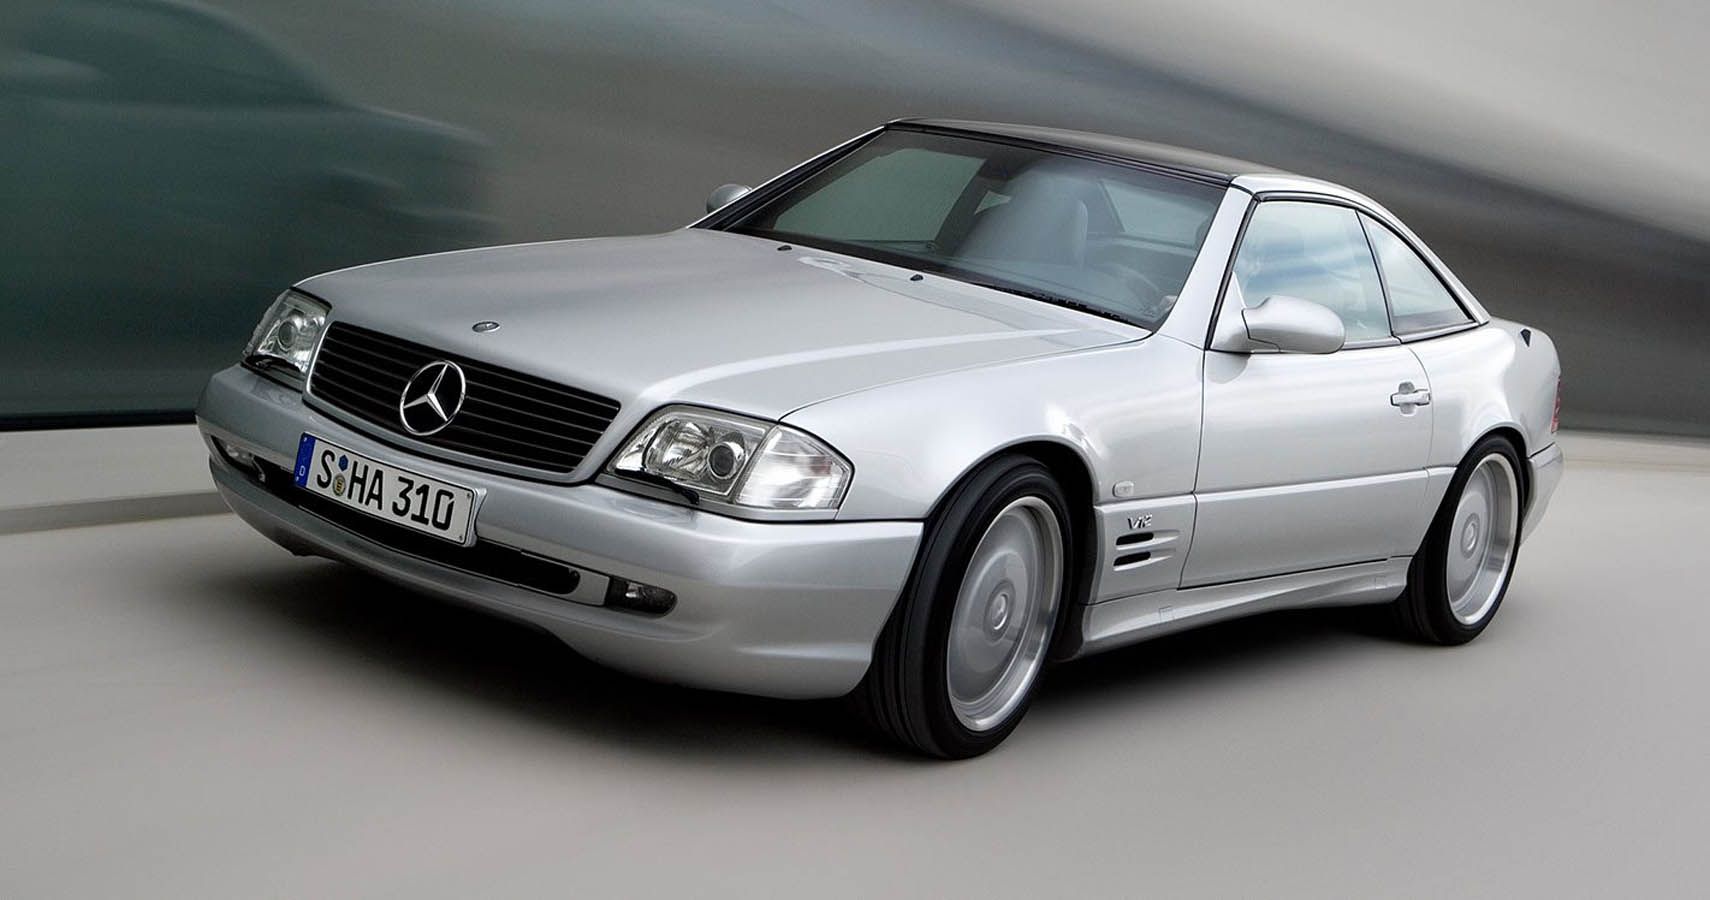 The Mercedes-Benz SL73 AMG And Bore A Massive 7.3-Liter V12 Engine That Came Rated At 518 Horses And 553 Ft-Lb Of Torque